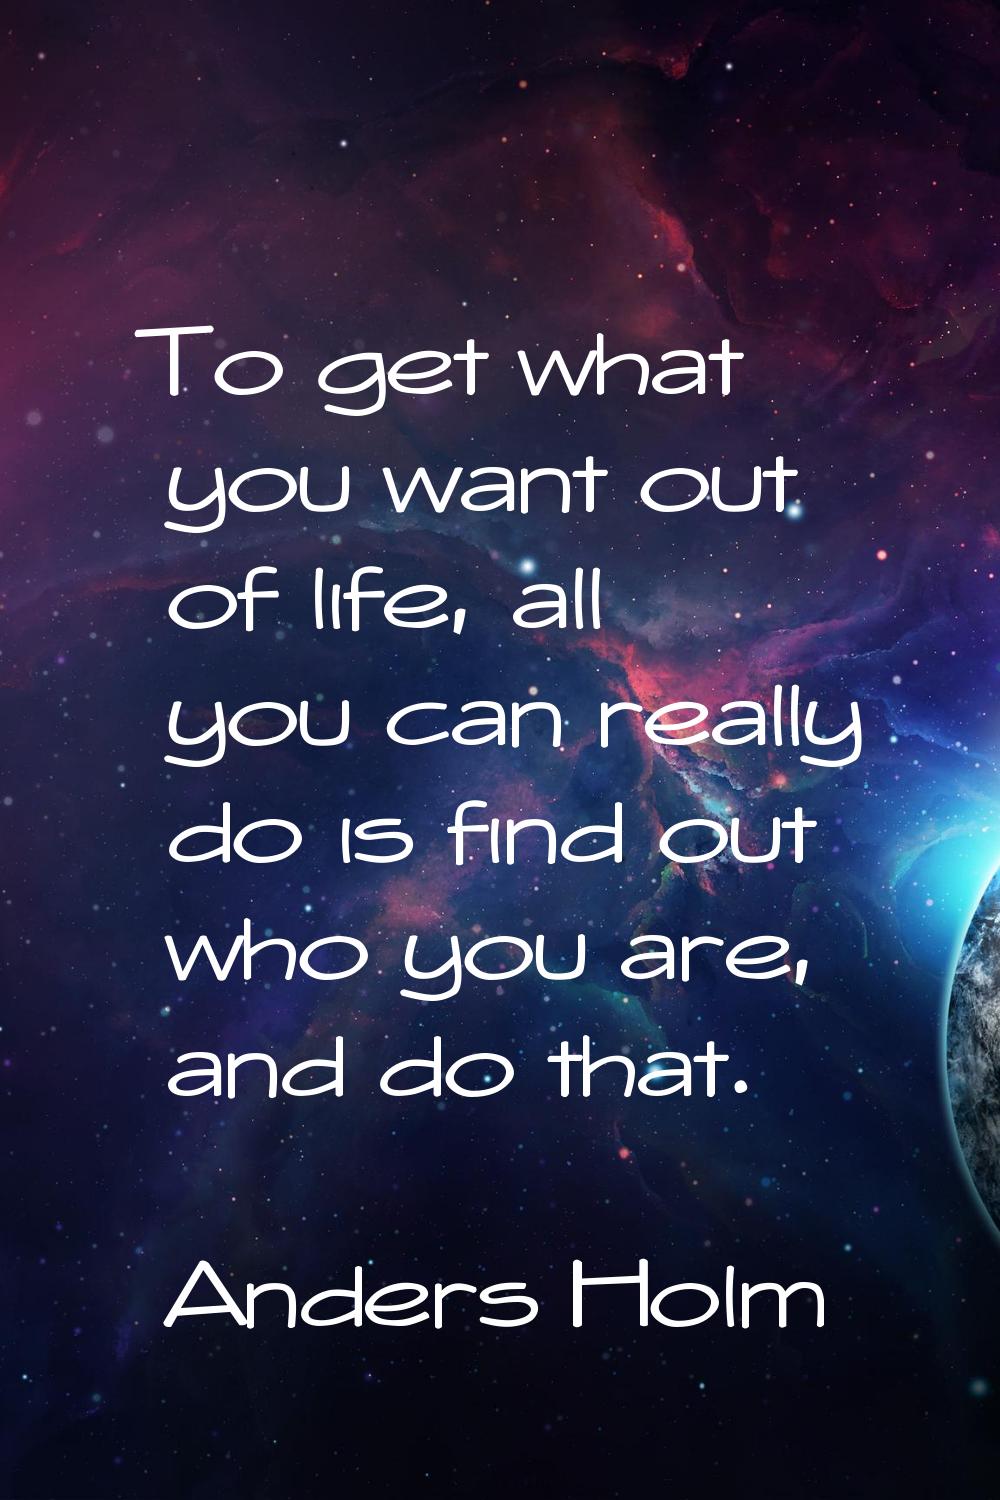 To get what you want out of life, all you can really do is find out who you are, and do that.